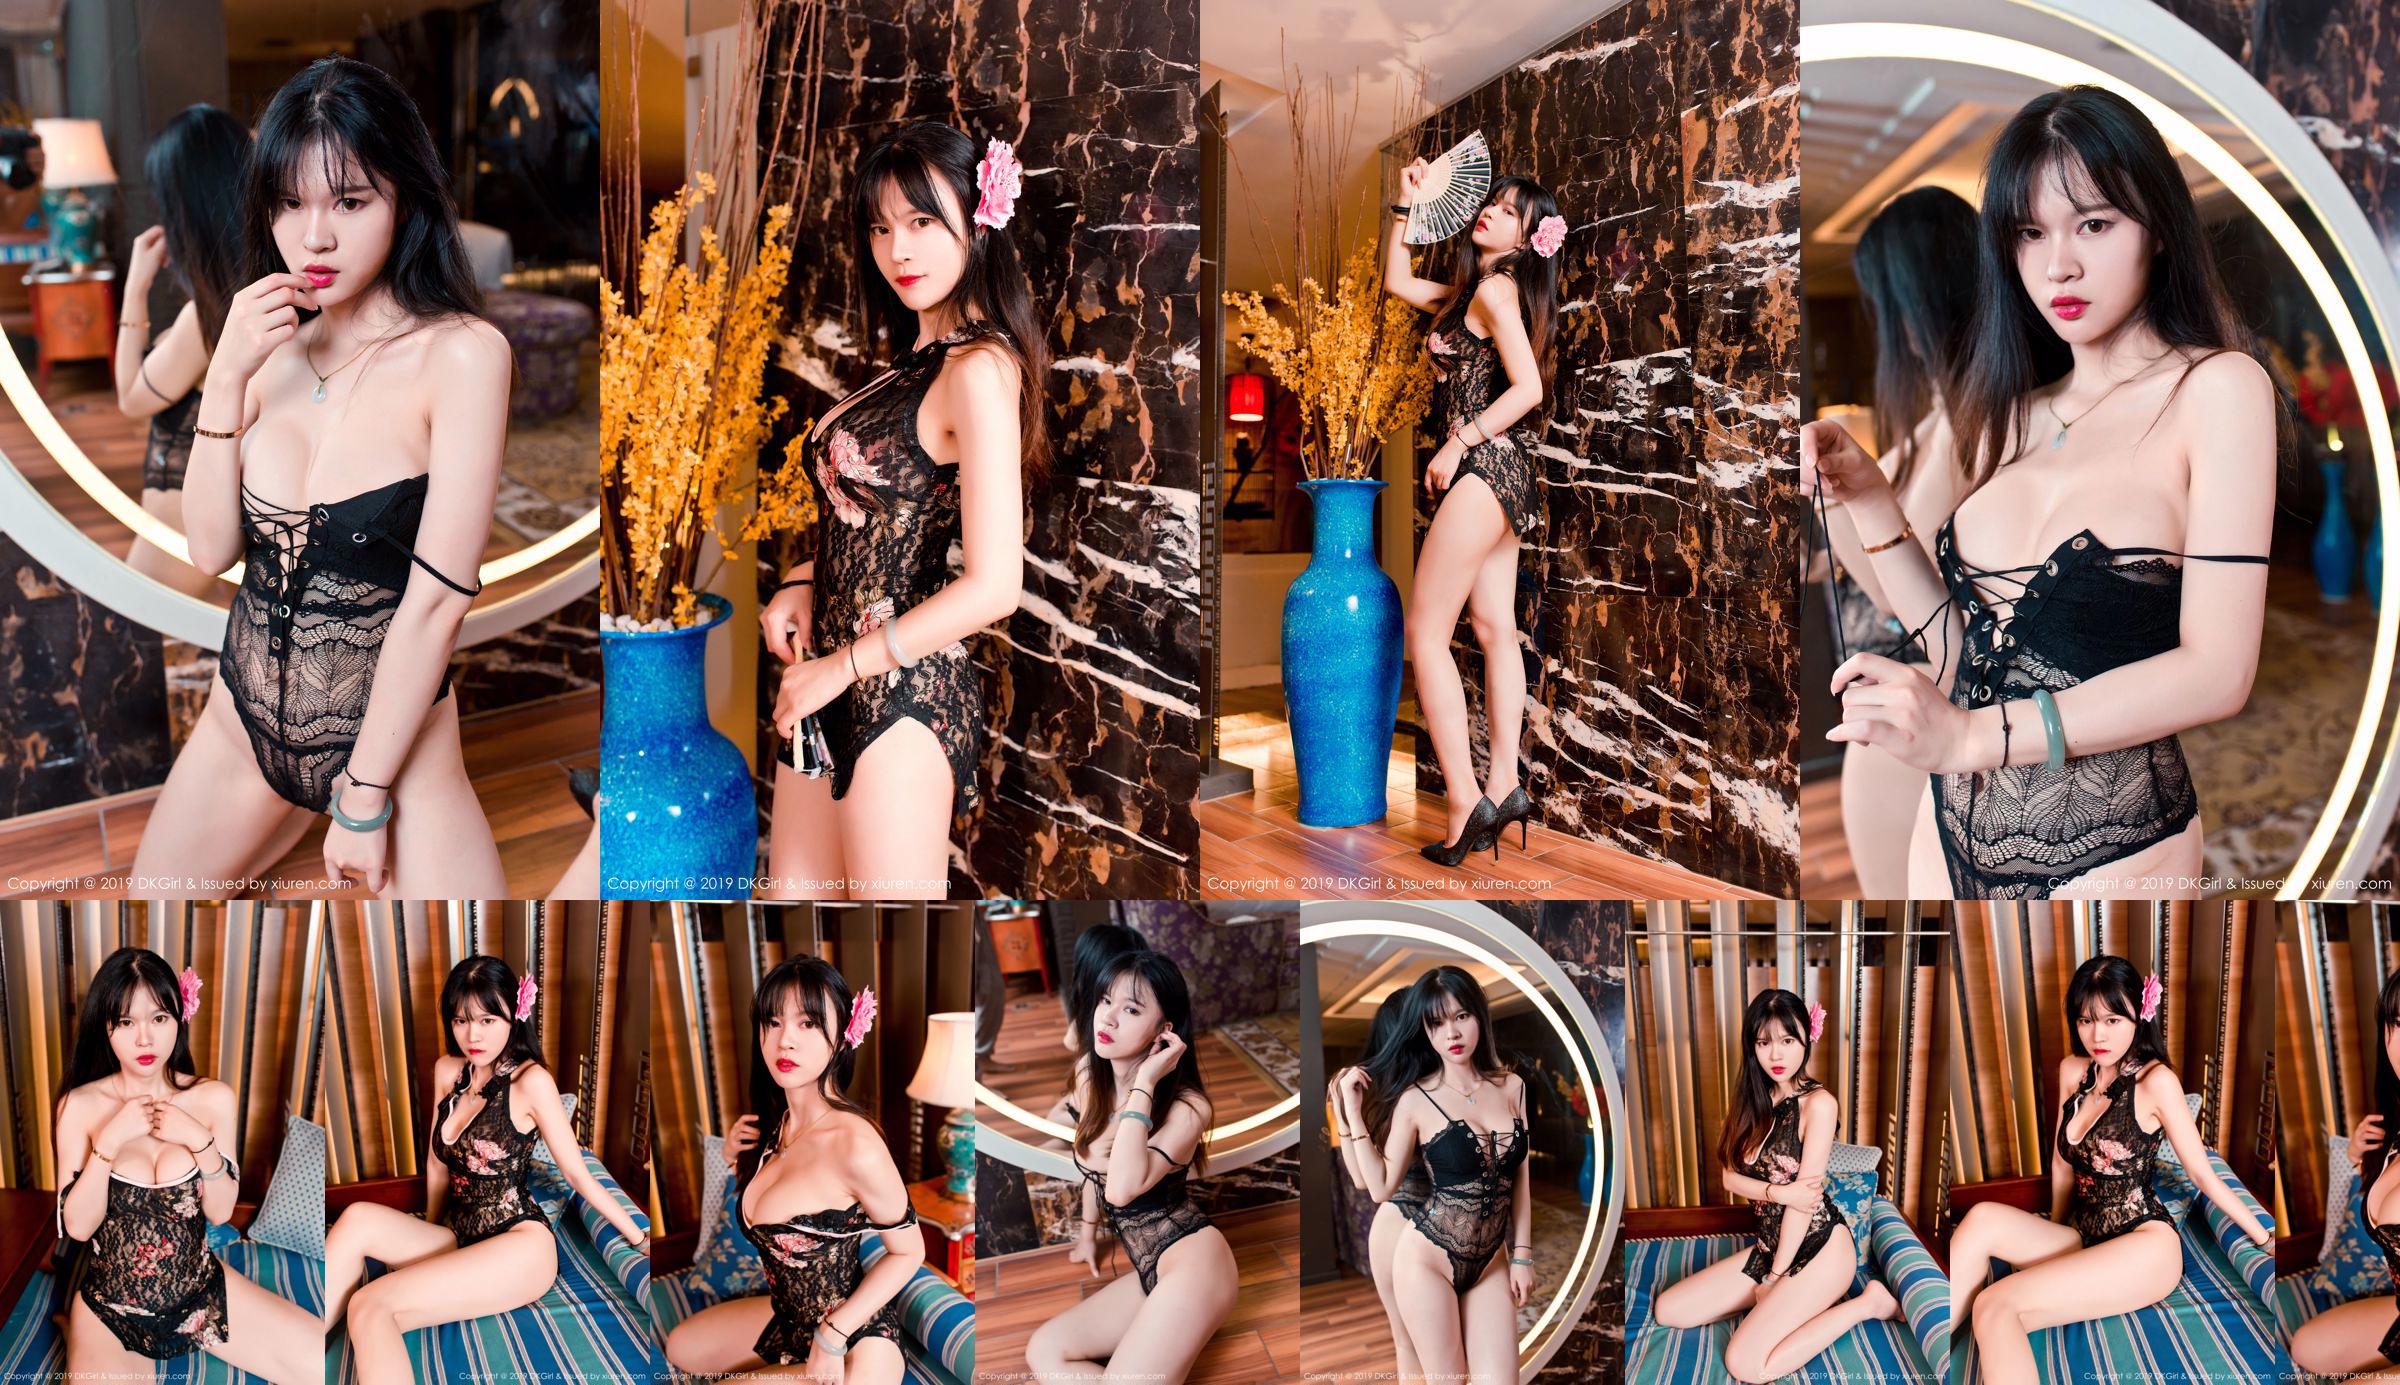 Peach marry "Delicious Hollow Cheongsam and Temptation Lace Underwear" [DKGirl] Vol.093 No.565192 Page 2